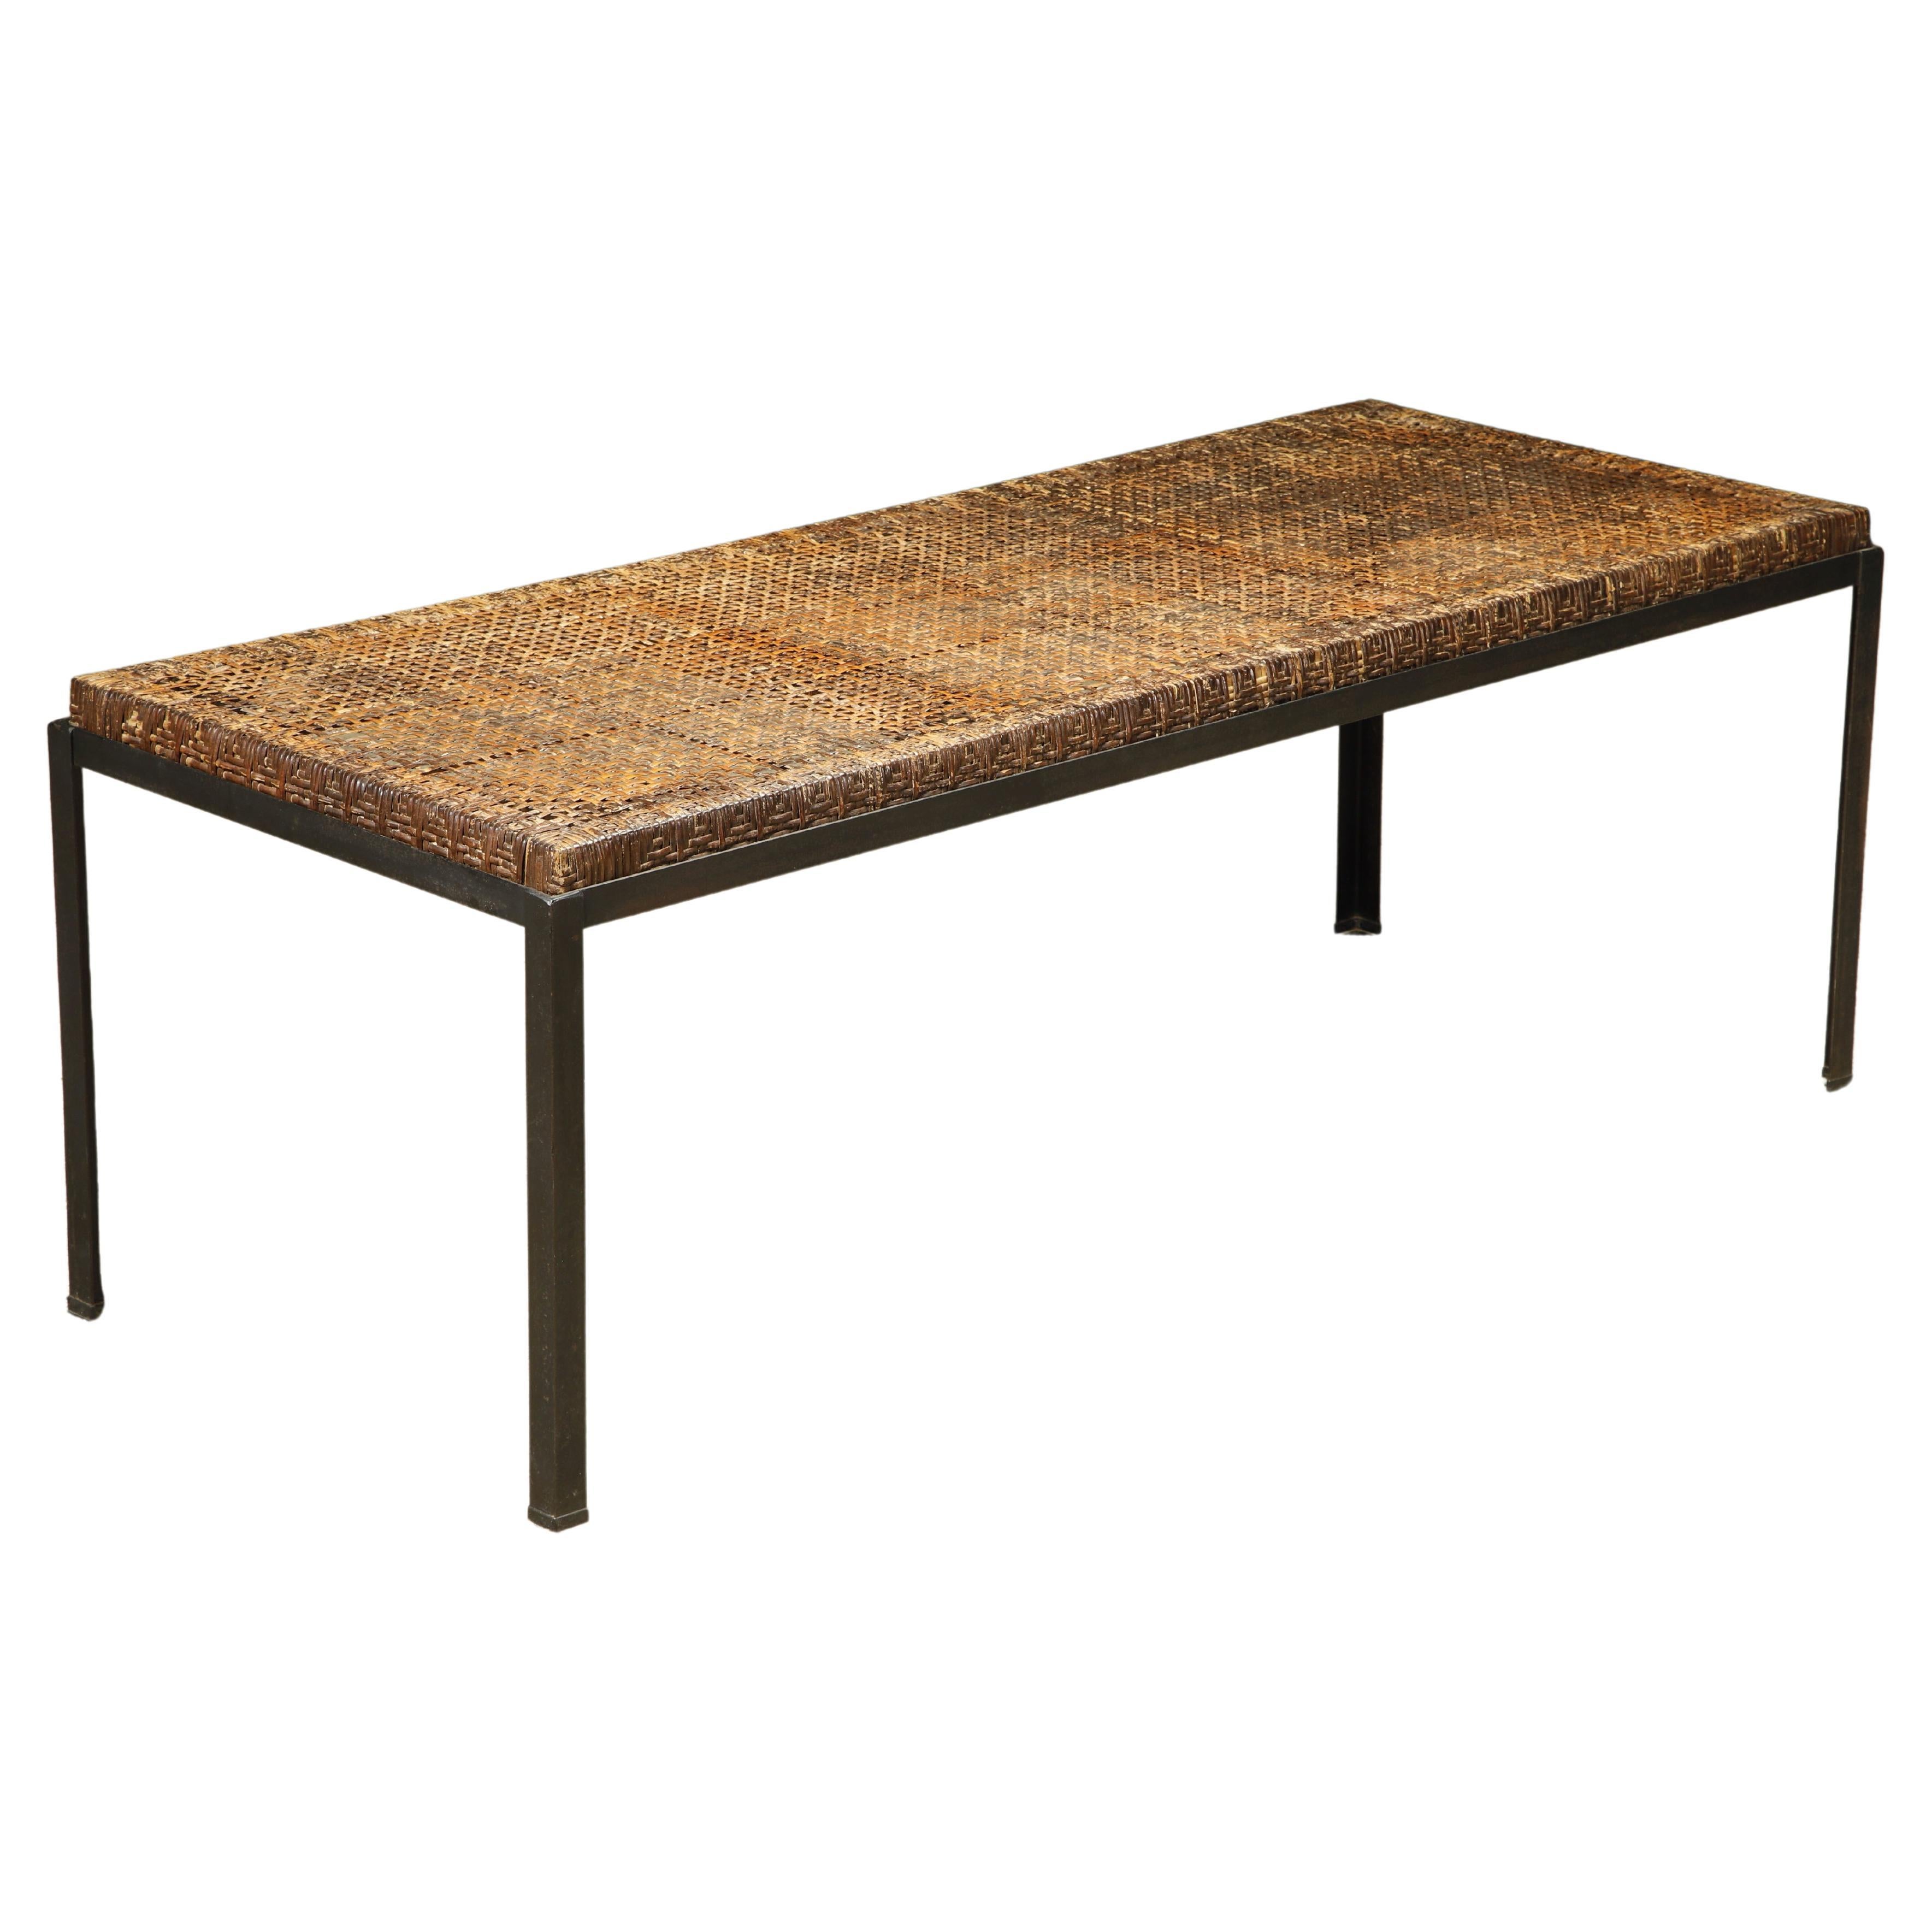 Caned Dining Table by Danny Ho Fong for Tropi-cal in Iron and Rattan, c 1960s For Sale